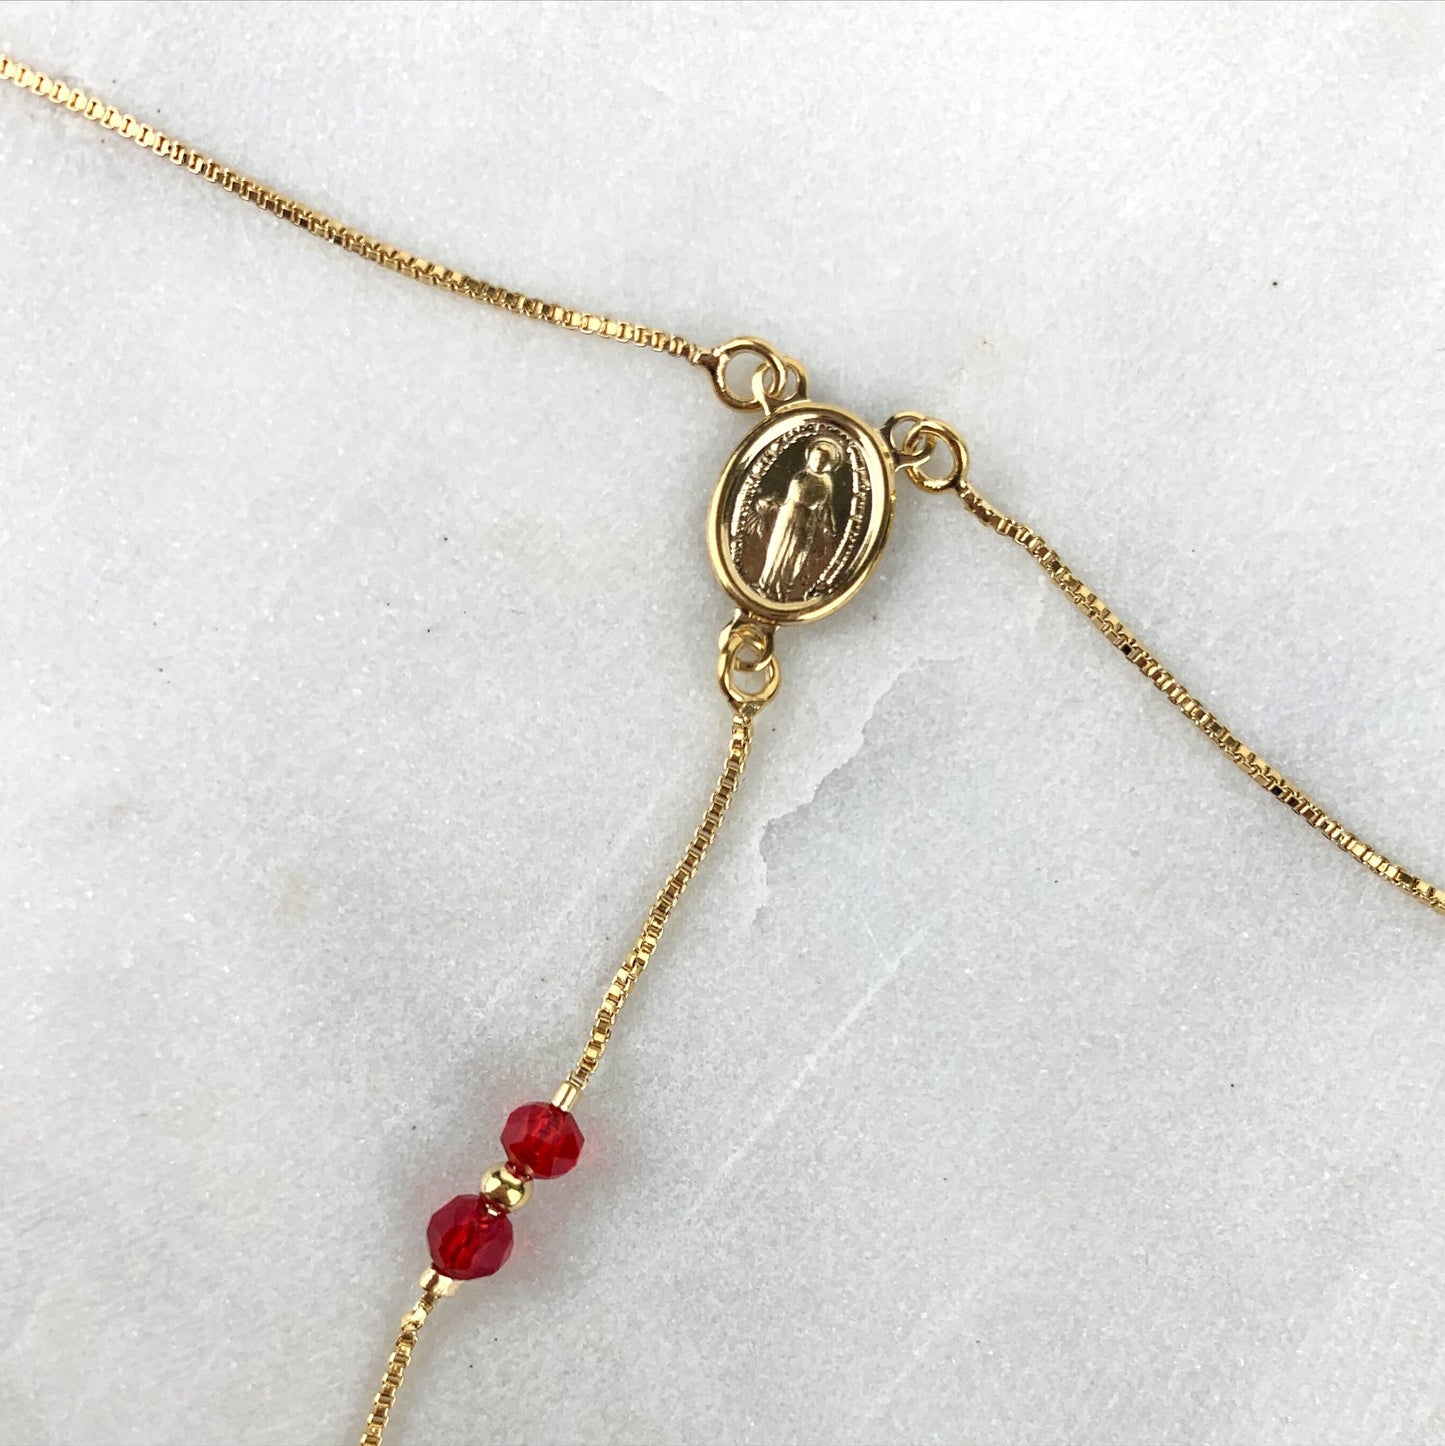 18k Gold Filled Virgen Milagrosa, Our Lady of Miracles Red Beads Rosary Necklace Religious Protection Jewelry, Wholesale Jewelry Supplies